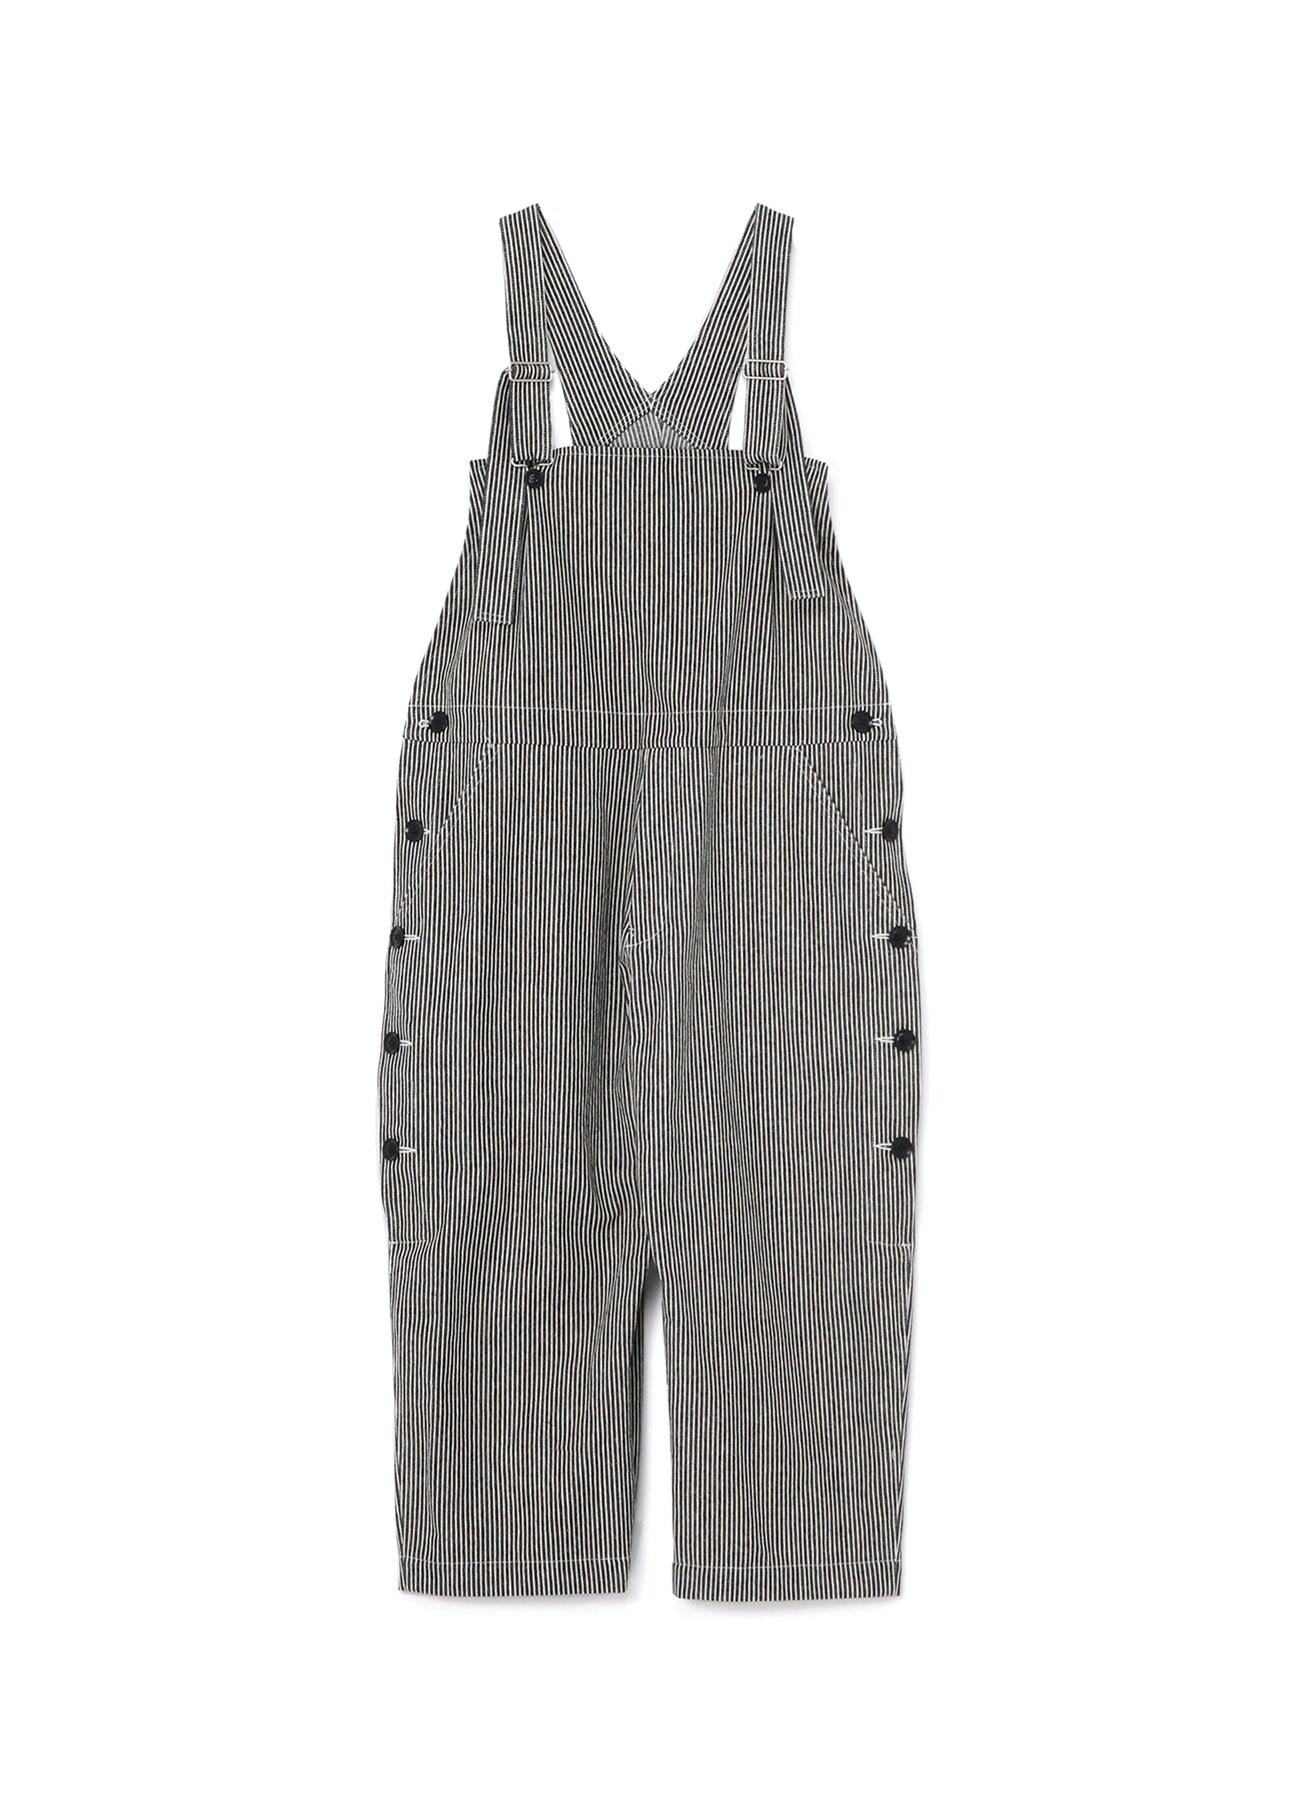 HICKORY BOLD OVERALLS